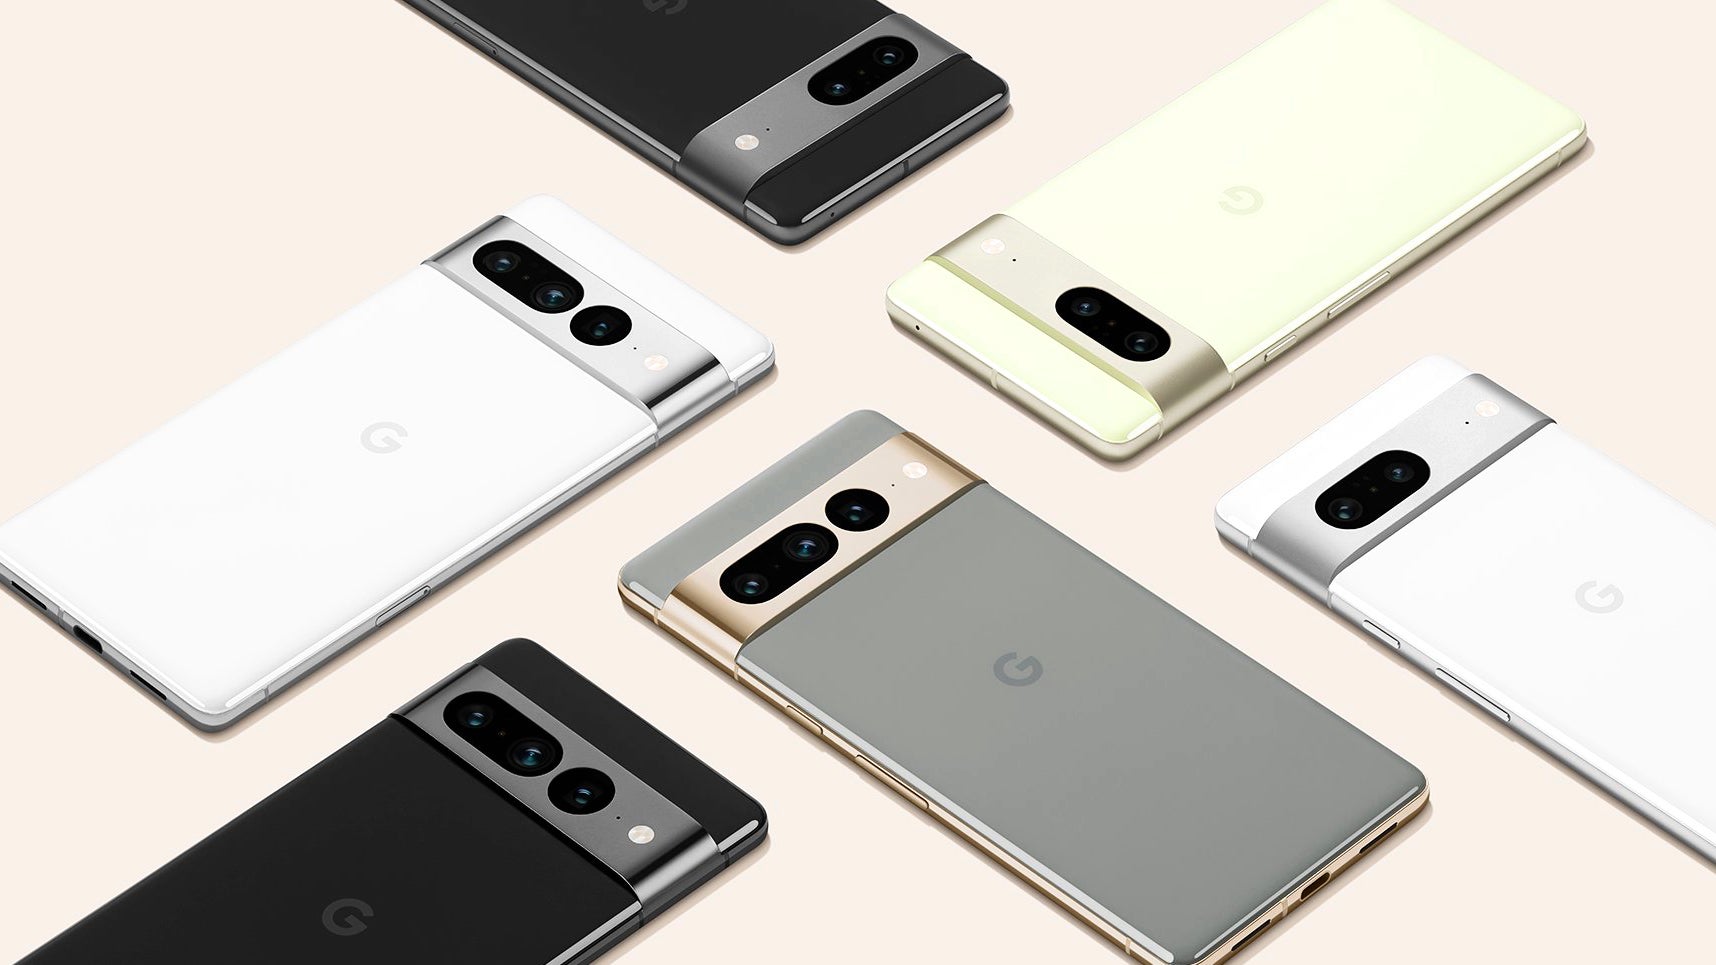 Careful! - Pixel 7 and Pixel 7 Pro: Skipping Google’s new phones because Pixel 6 gave me Pixelphobia